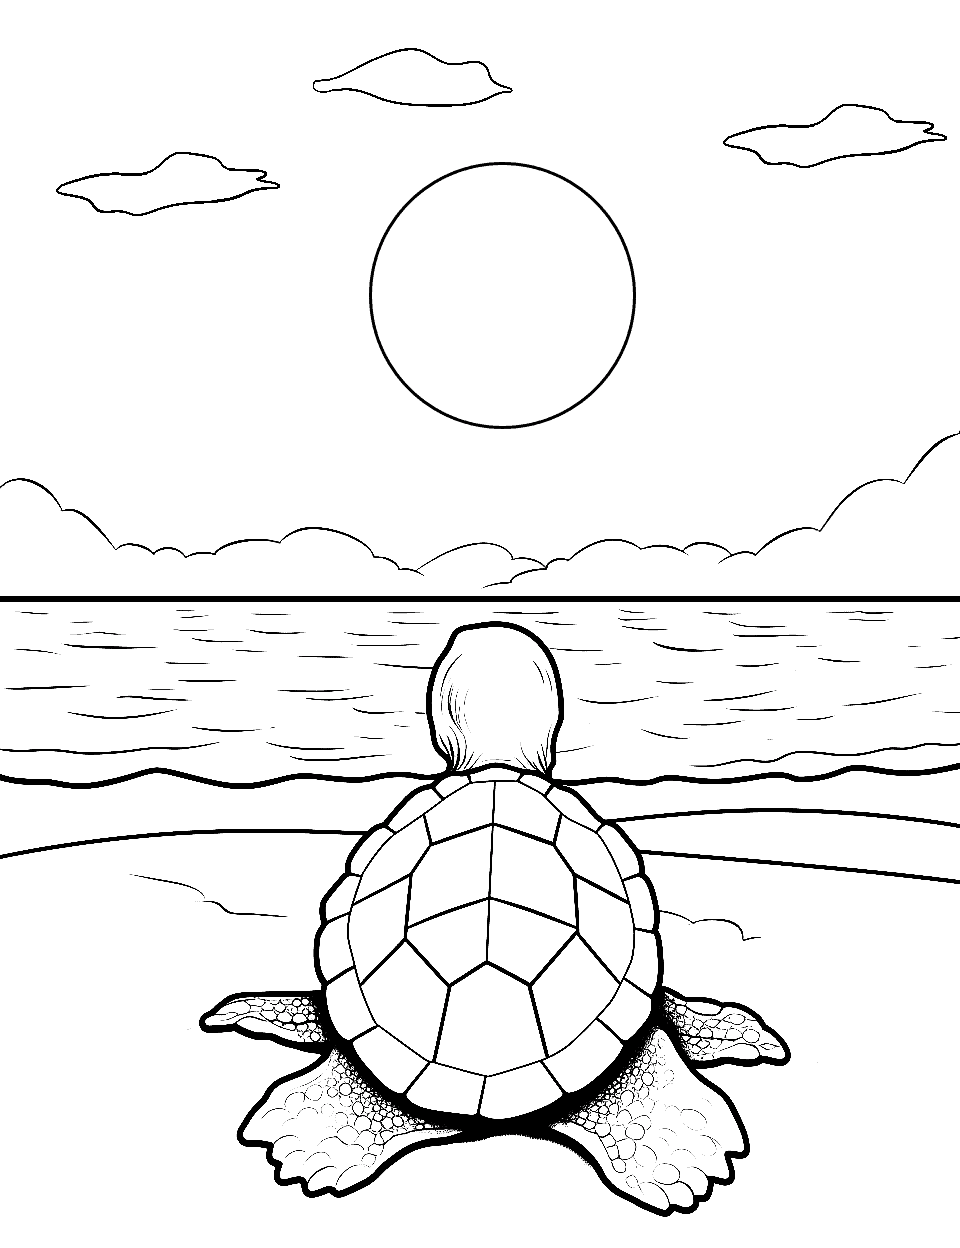 Sunrise Viewing Turtle Coloring Page - A turtle watching the sunrise.